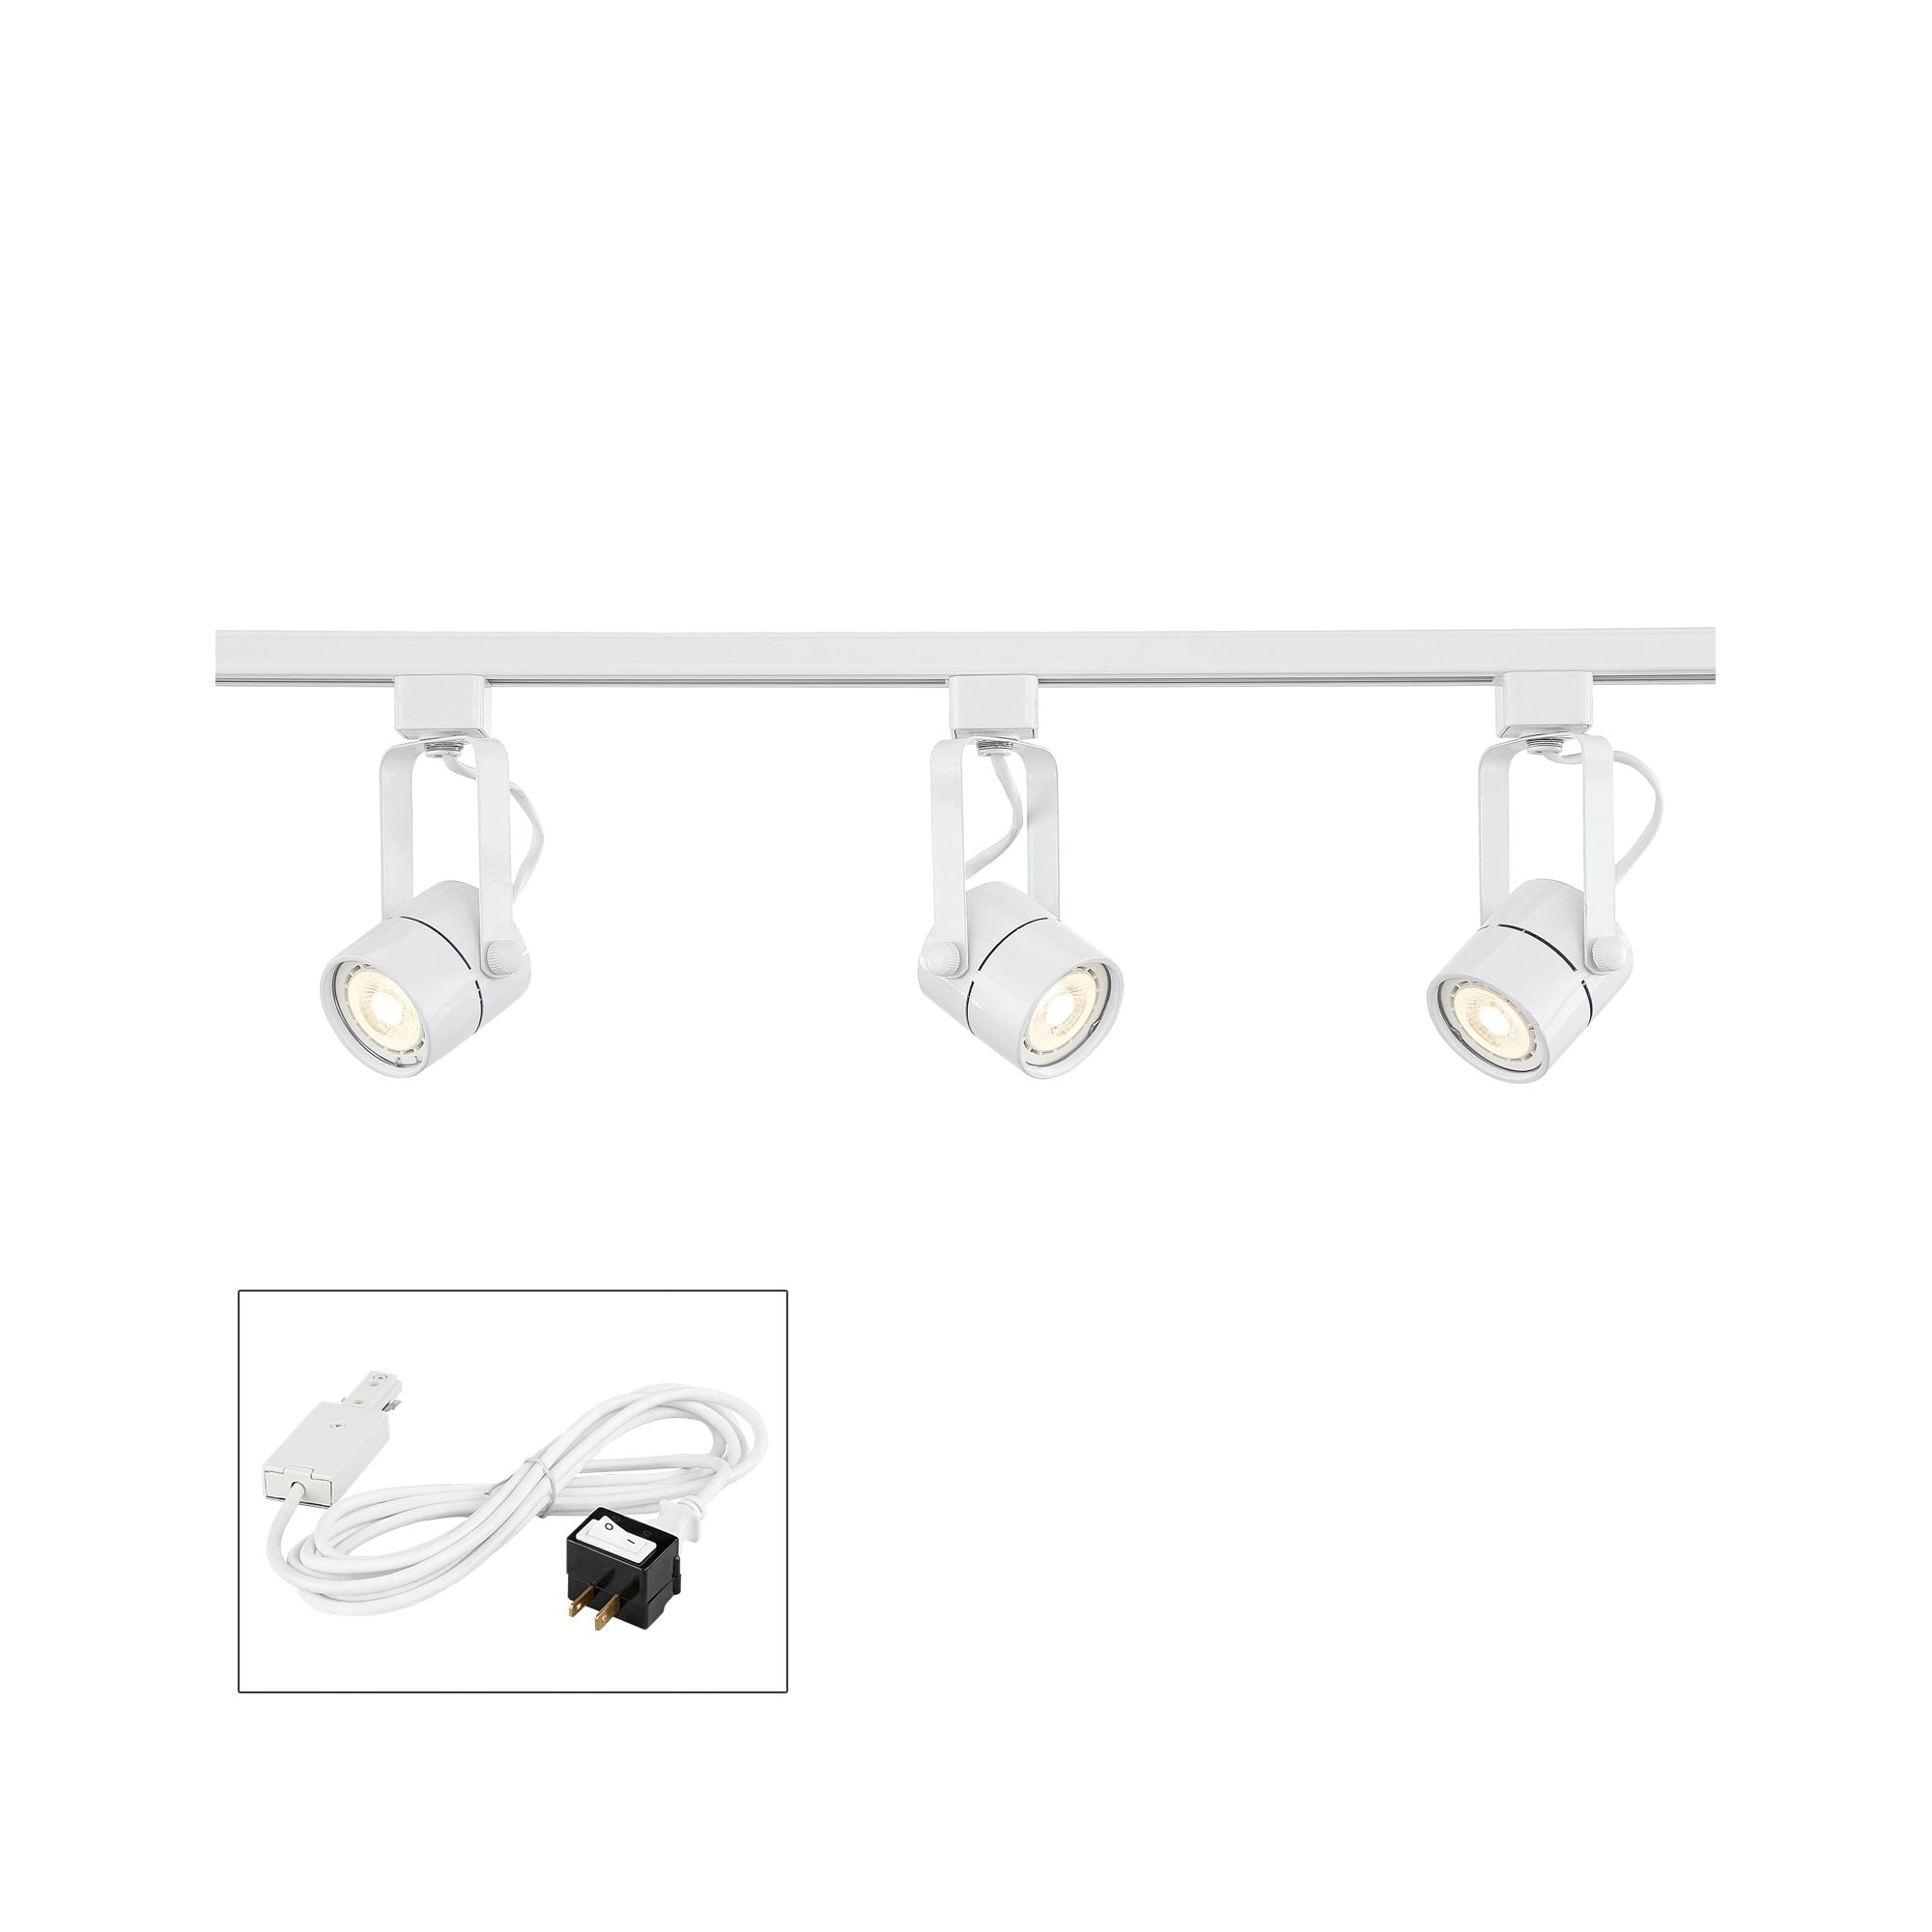 New Kichler Under Cabinet Lighting Fixture Direct Wire PRO LED 12051 WH  White 